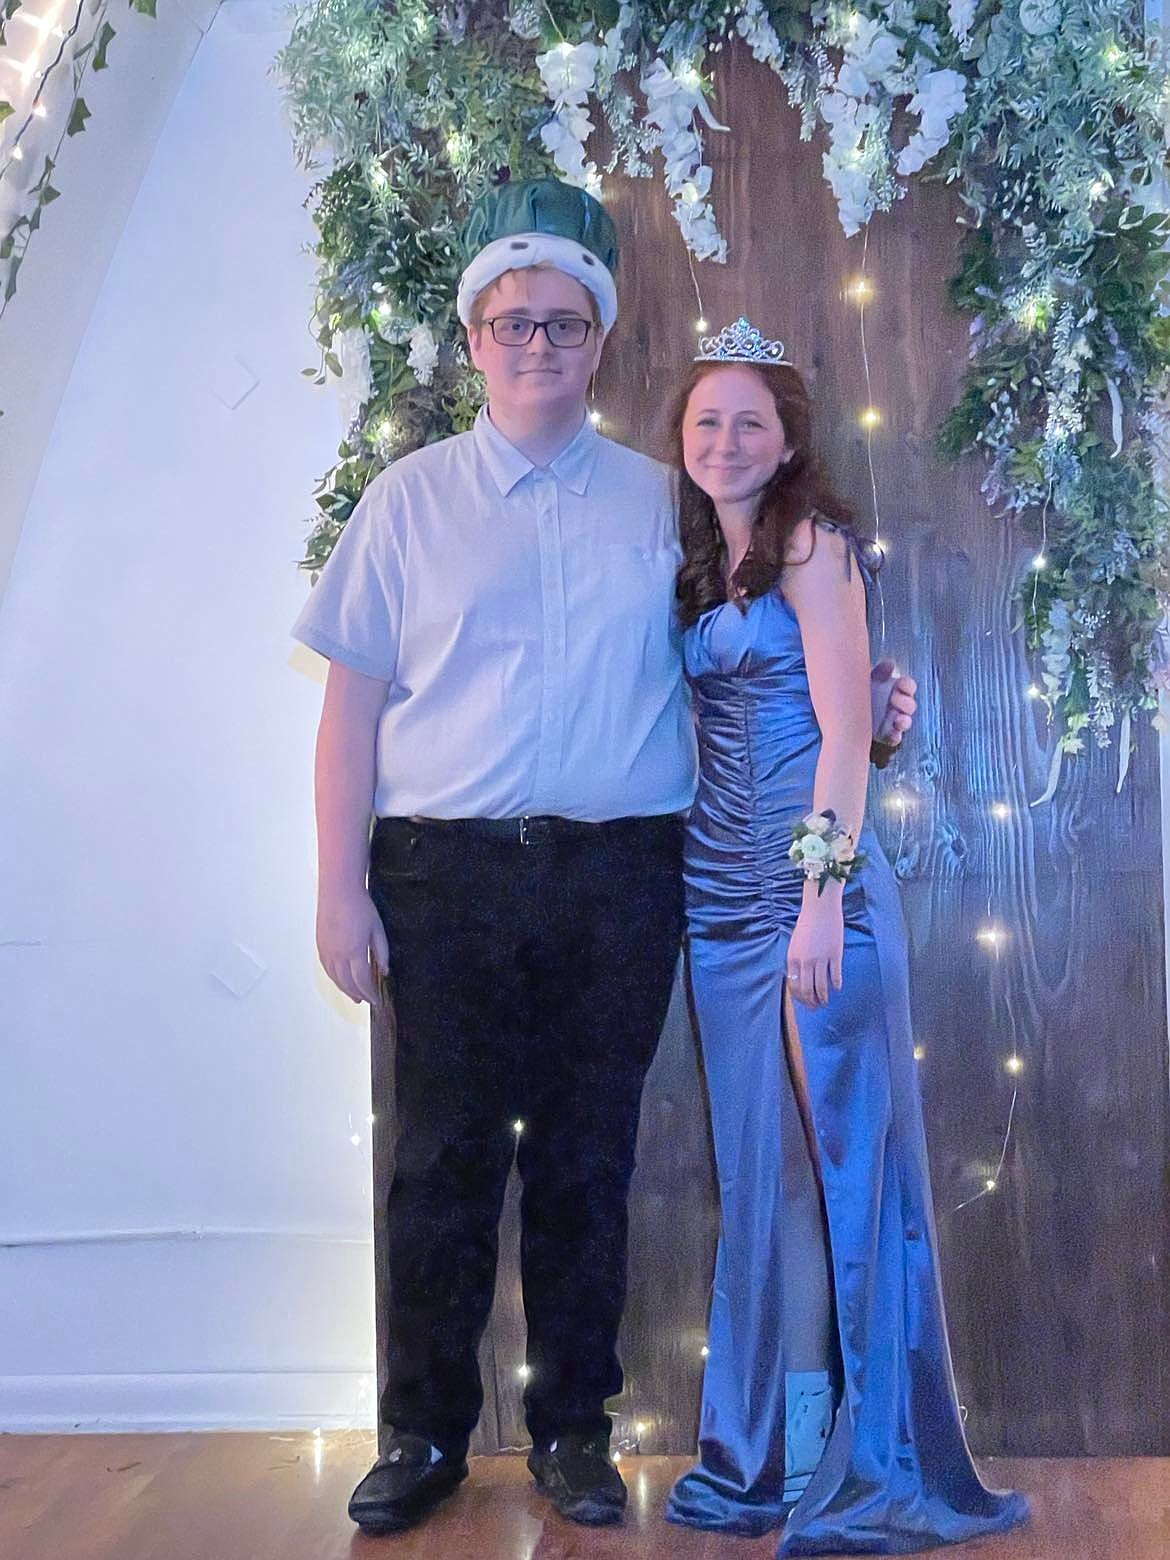 On April 16, David Flippin and Kylie Quick were voted  King and Queen for the Superior High School Prom. (Photo courtesy/Stephanie Outland Quick)